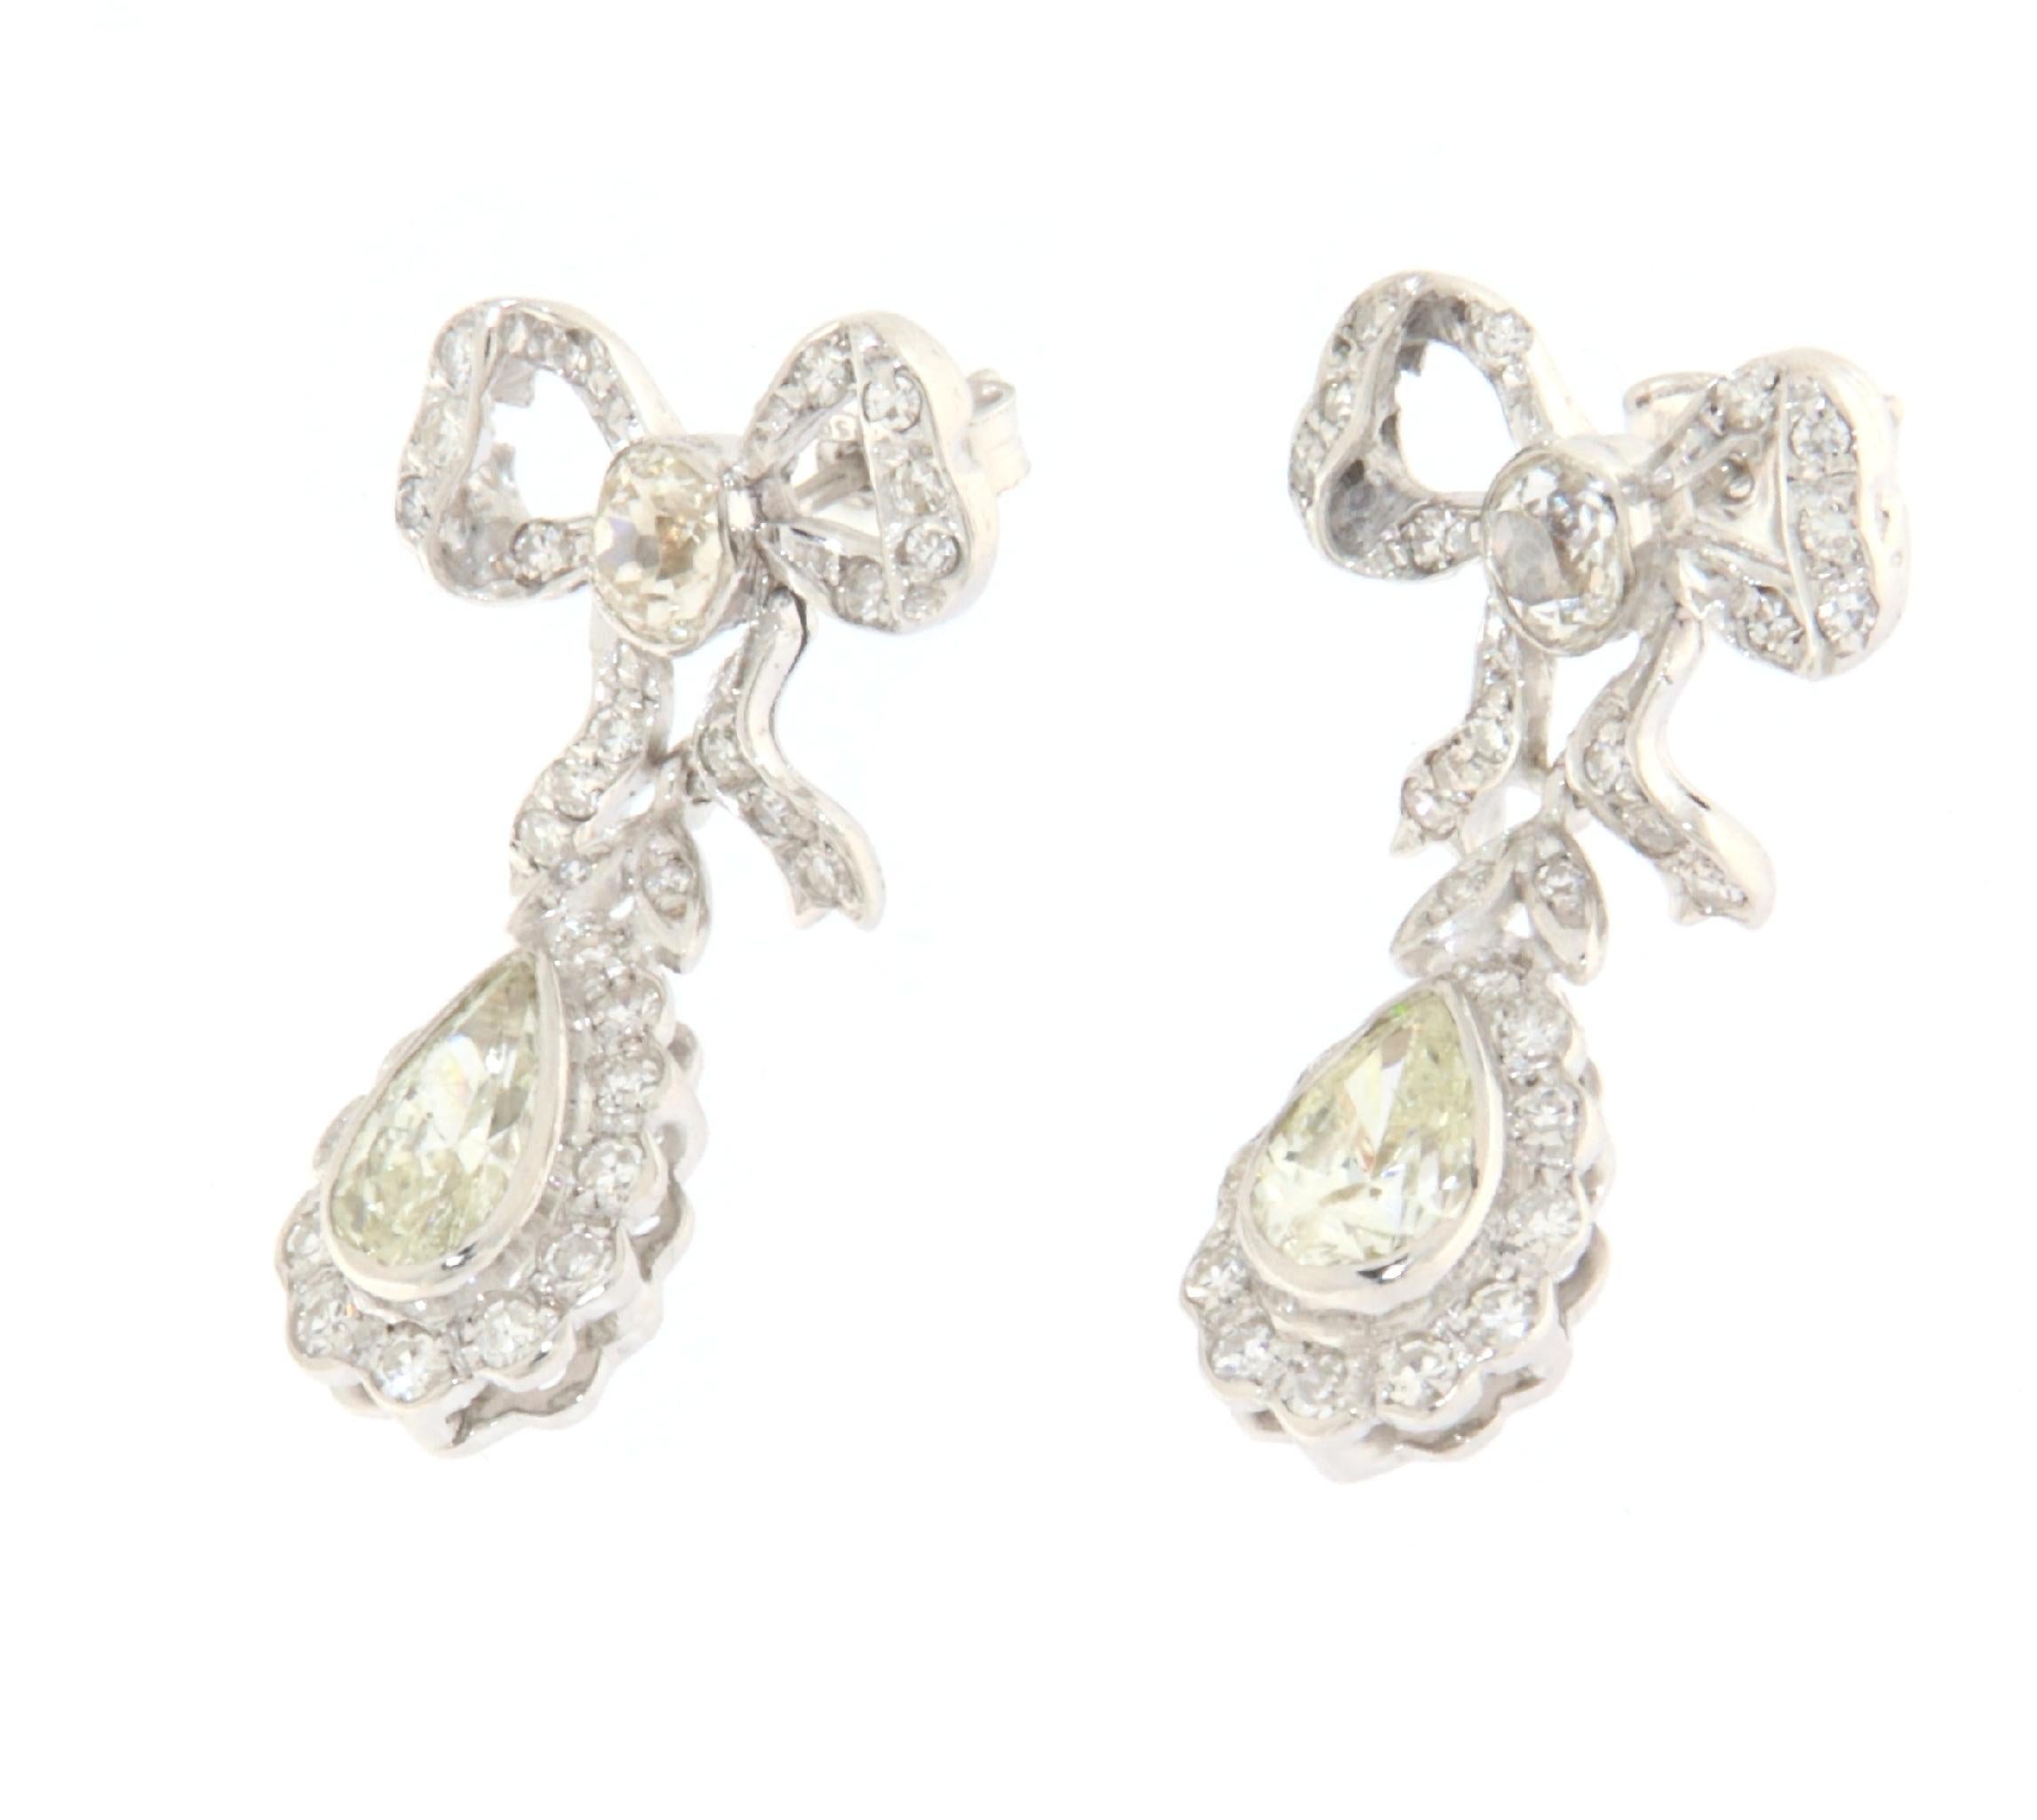 These 18-karat white gold earrings epitomize elegance and sophistication. With a design that blends classicism and innovation, these pieces are perfect for those seeking a blend of discreet luxury and spectacular presence.

Each earring features a